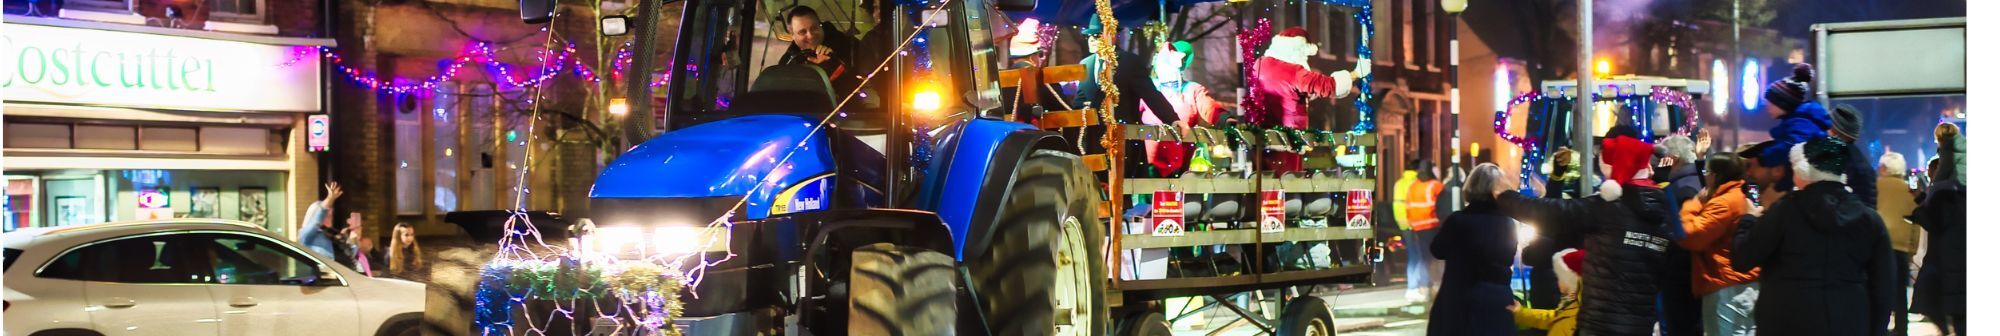 tractors-covered-in-fairylights-for-christmas-rally